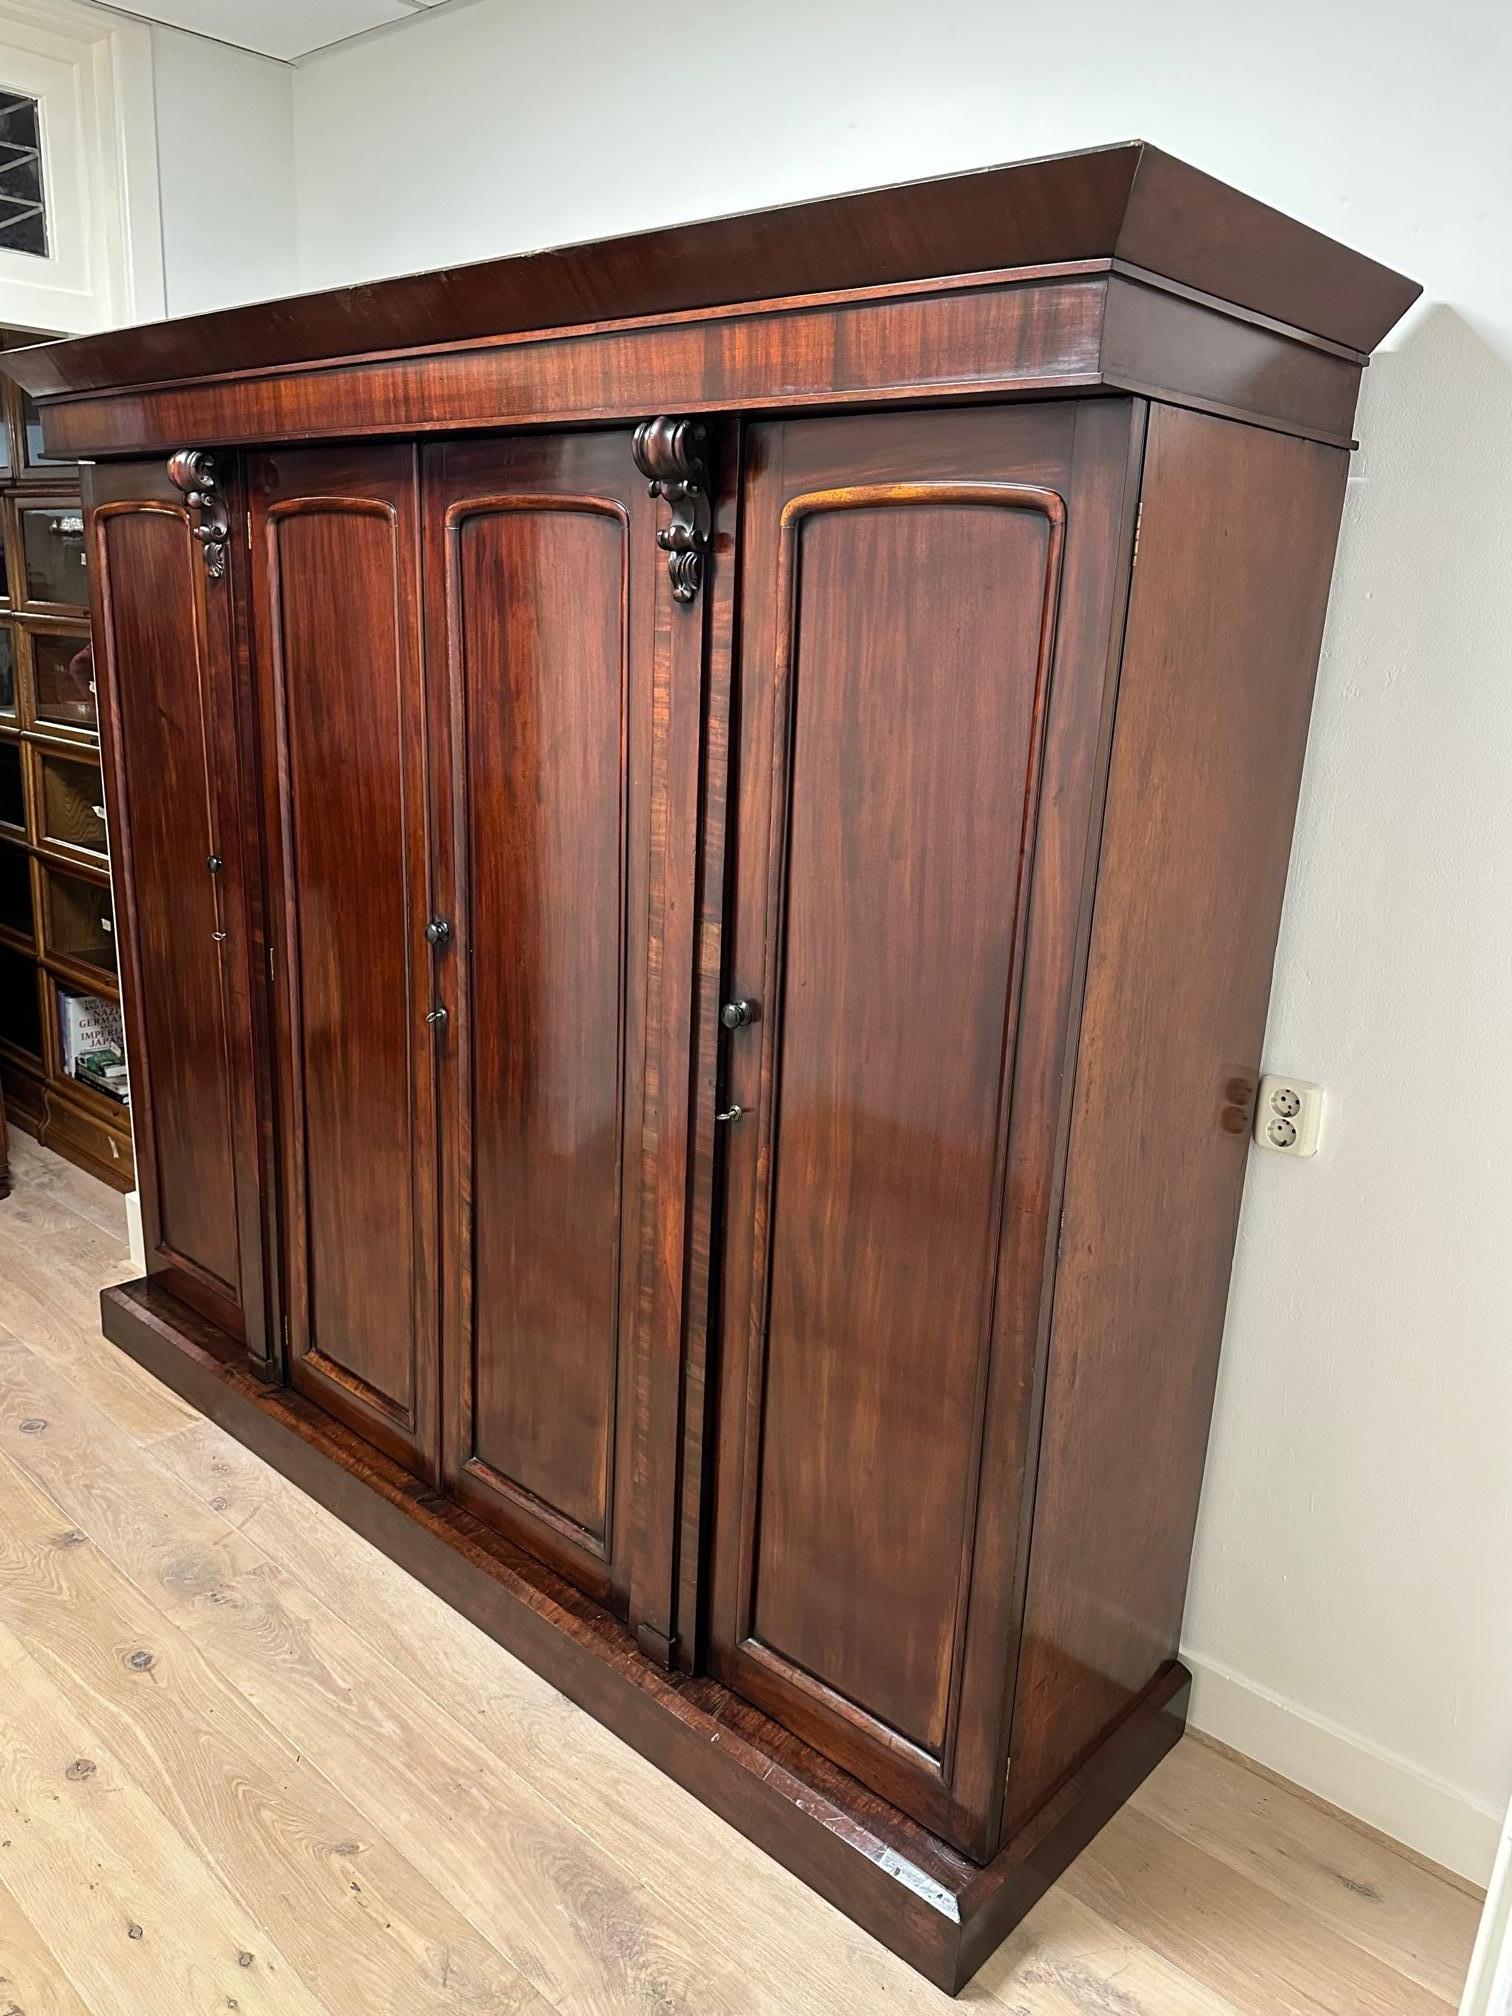 Beautiful sleek antique wardrobe from the Victorian era. The cabinet is in good and original condition. Beautiful weathered patina.
What makes the cabinet beautiful is that it is a 4-door version without mirrors in the doors.